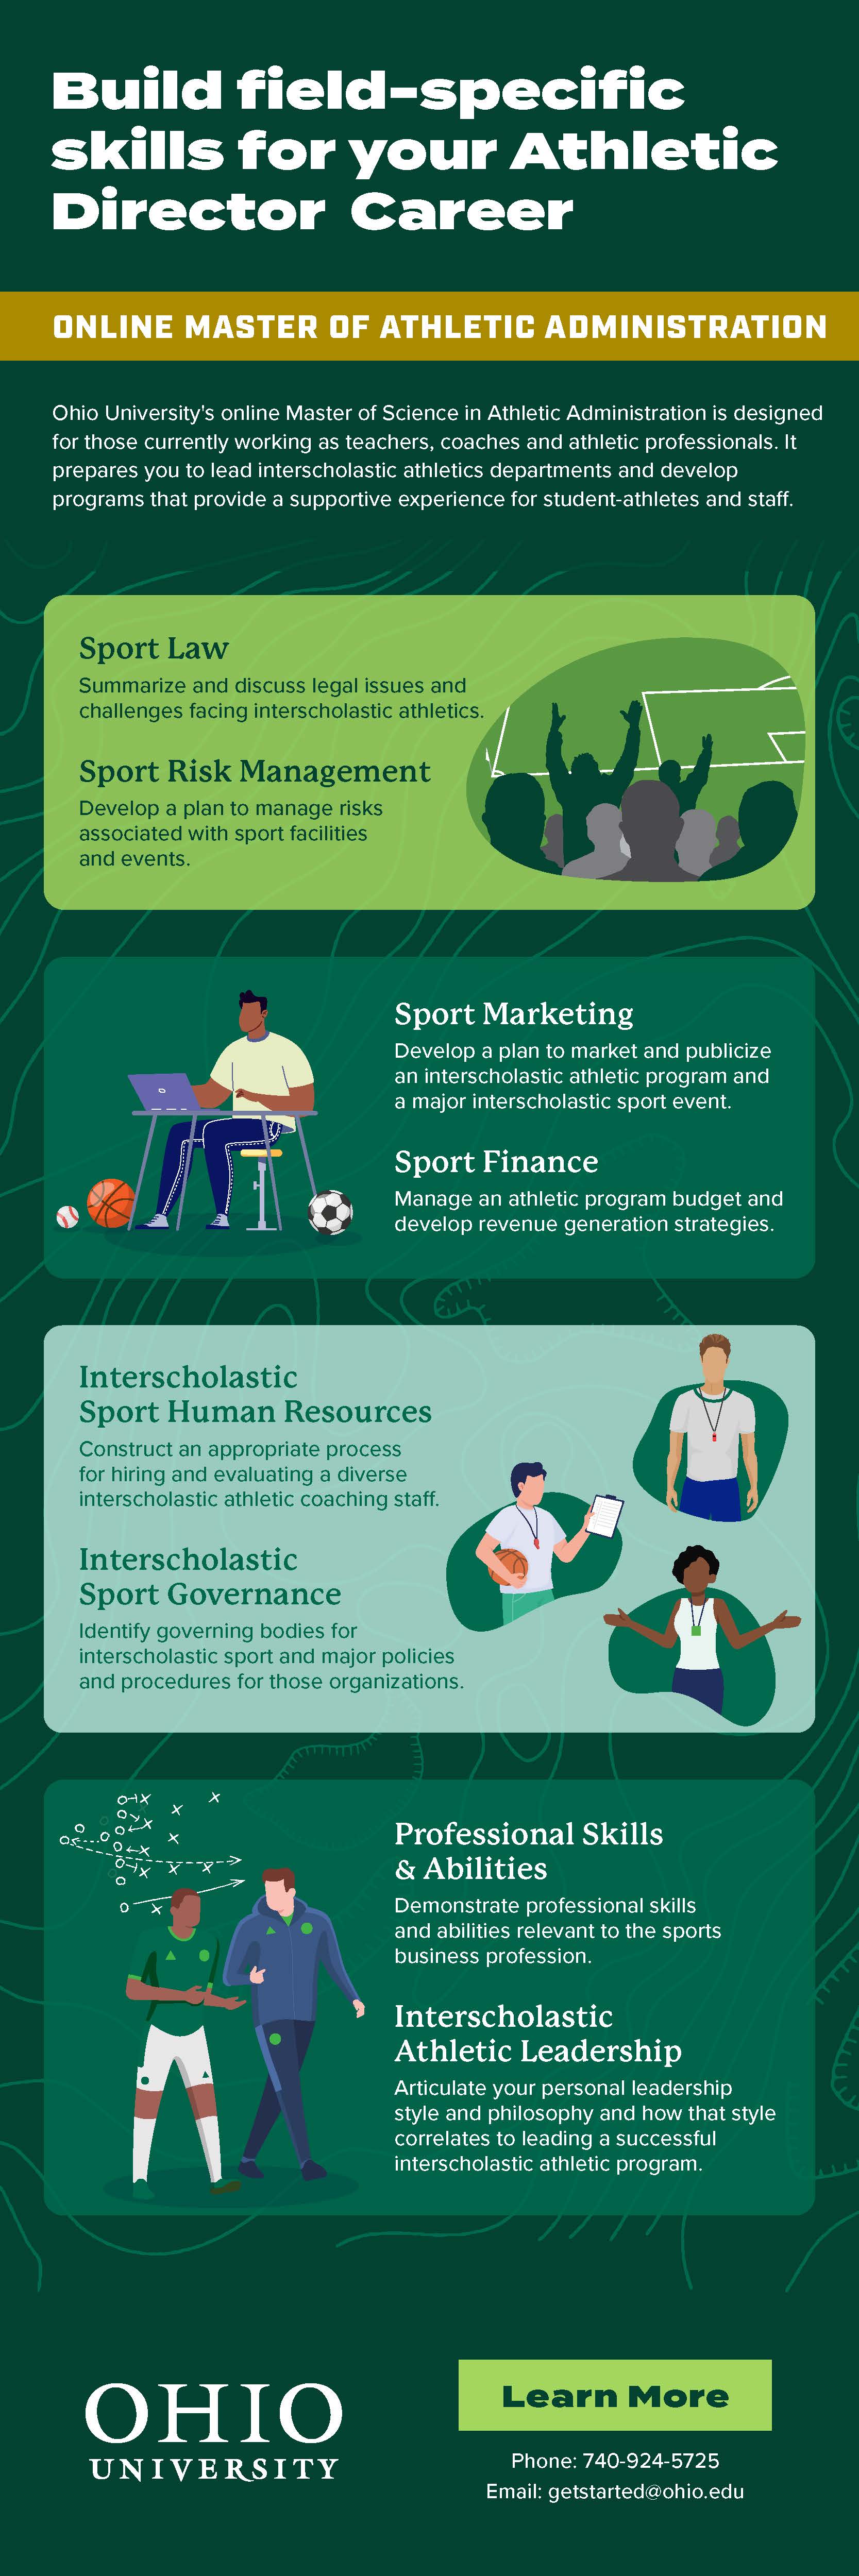 A Career as an Athletic Director: Description, Duties and Degree